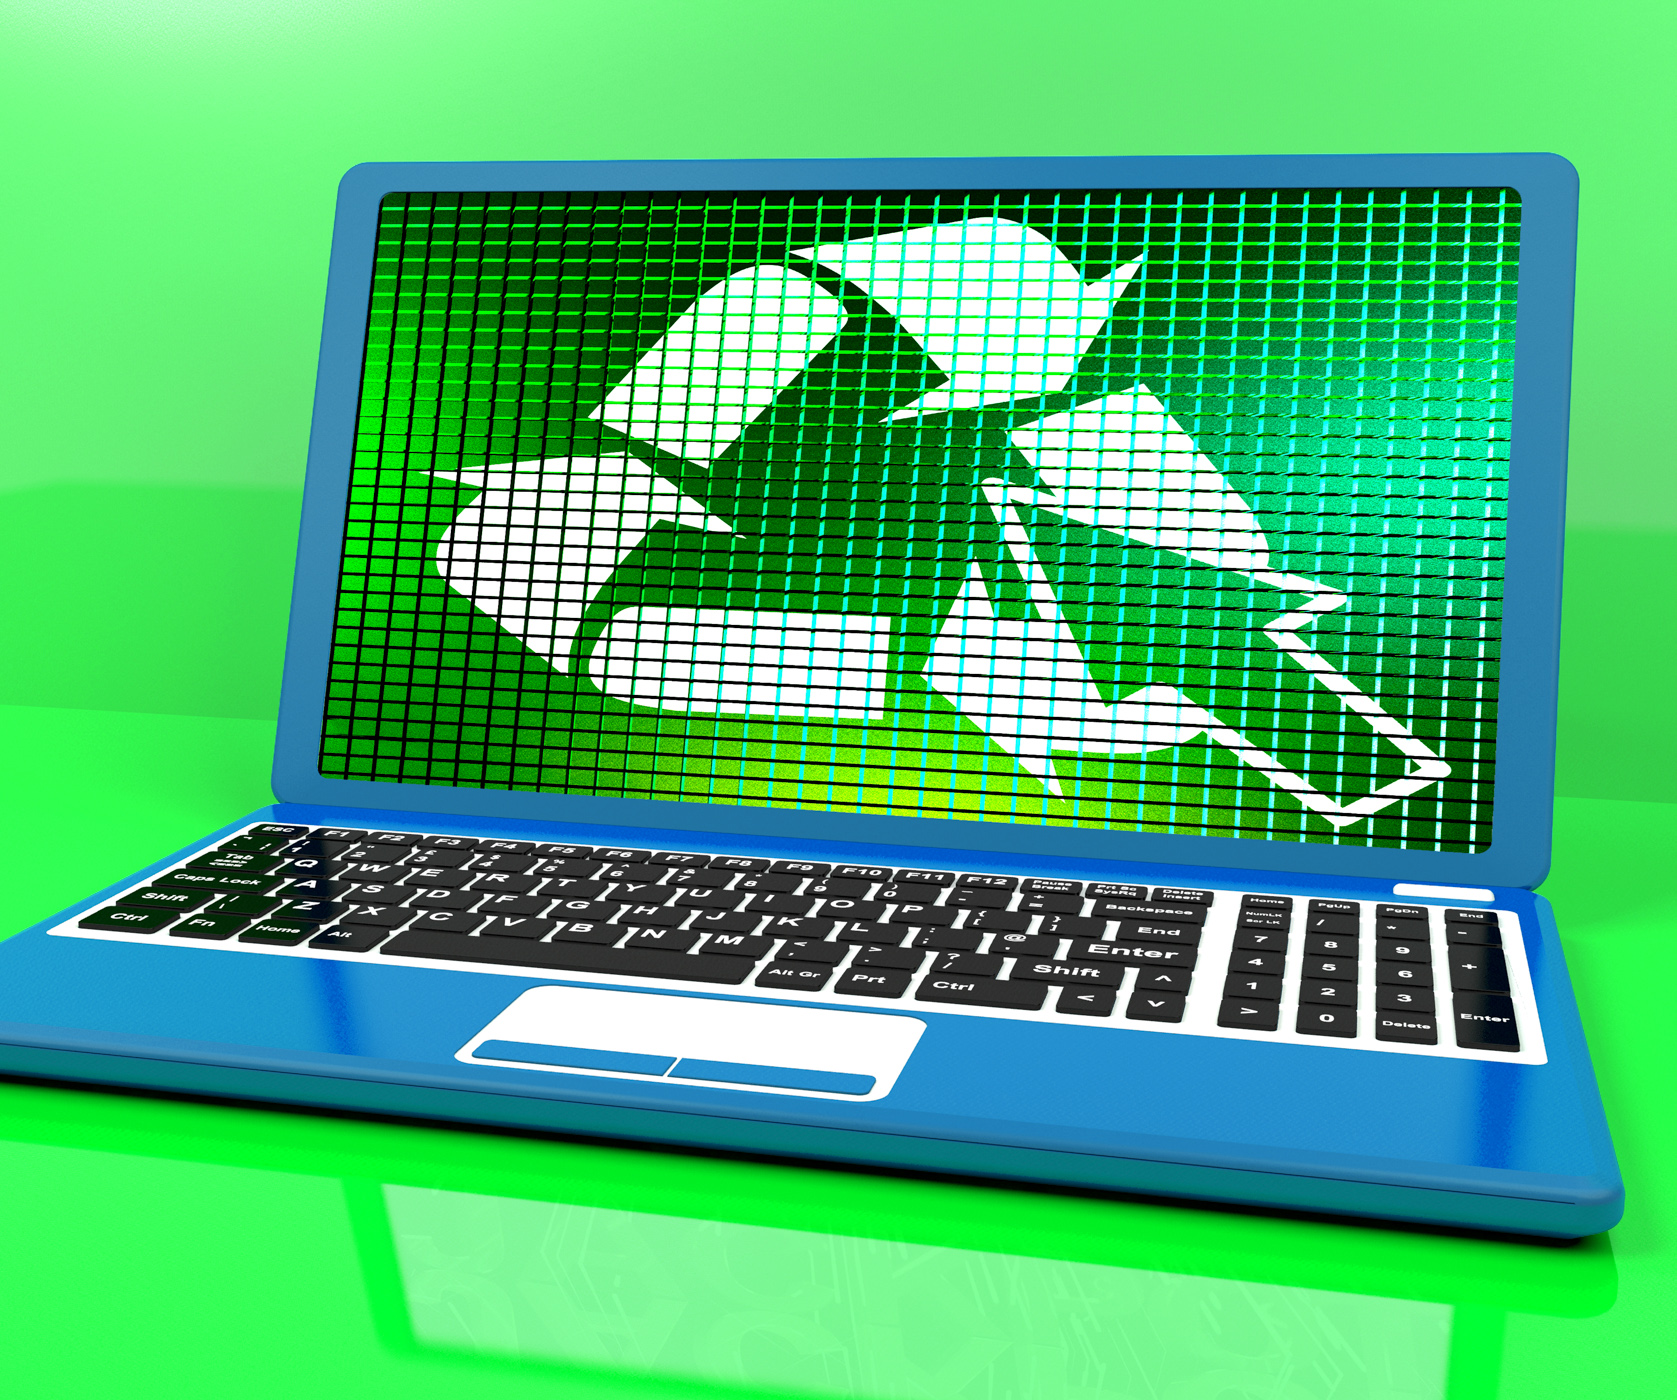 Recycle Icon On Laptop Showing Recycling And Eco Friendly, Gogreen, Renewable, Recycling, Recycled, HQ Photo